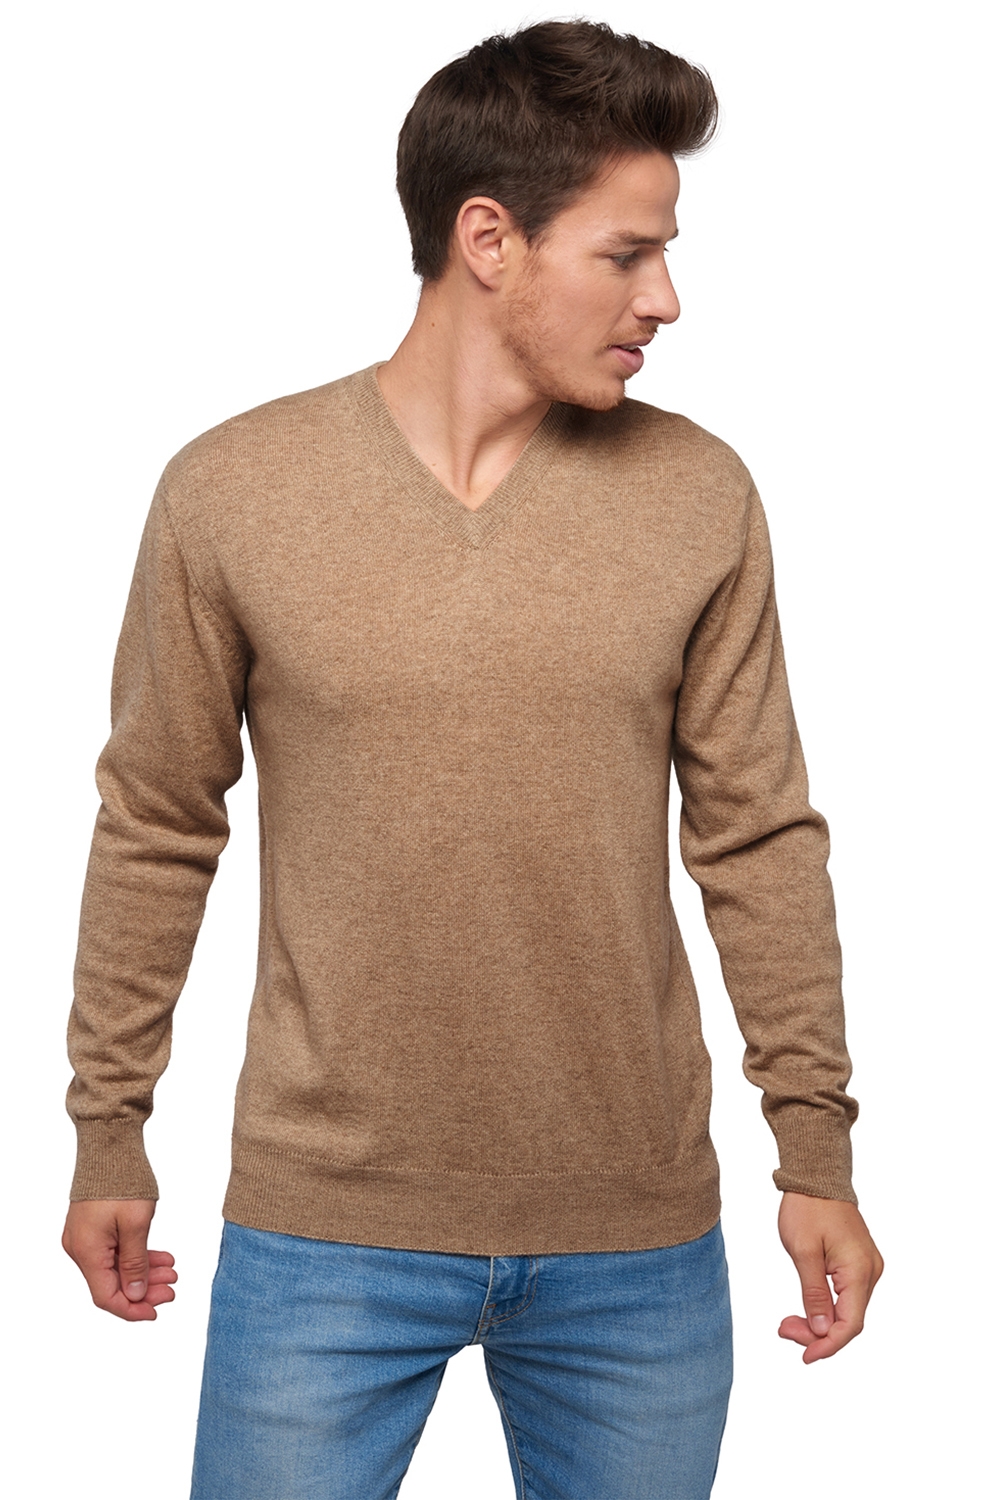 Cachemire Naturel pull homme col v natural poppy 4f natural brown 4xl